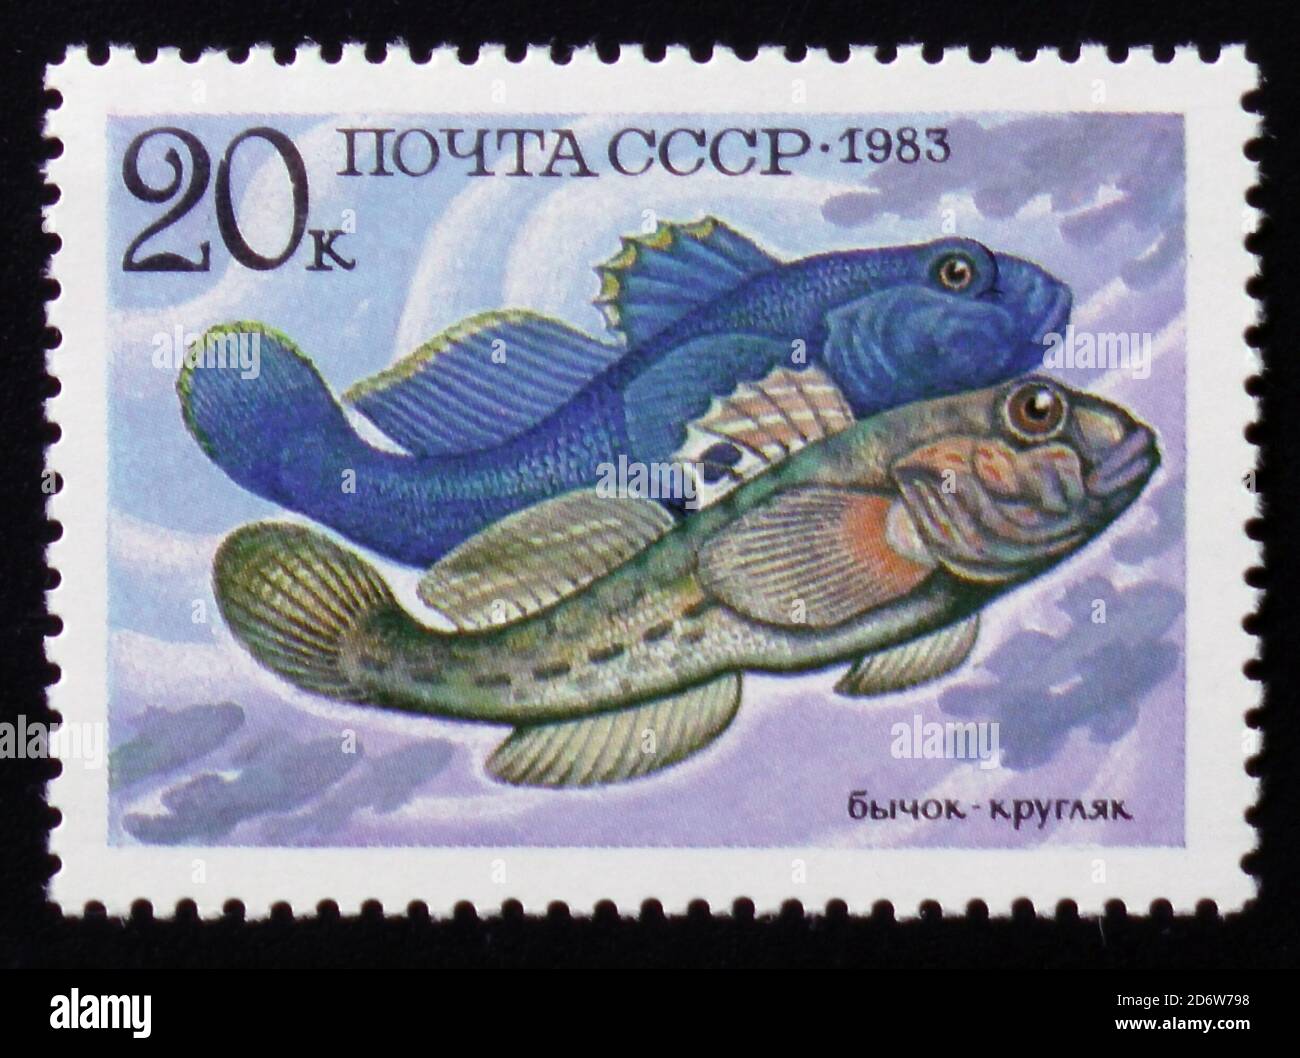 MOSCOW, RUSSIA - FEBRUARY 12, 2017: A stamp printed in the USSR shows marine fish, Neogobius melanostomus, from the series 'Food Fish', circa 1983 Stock Photo